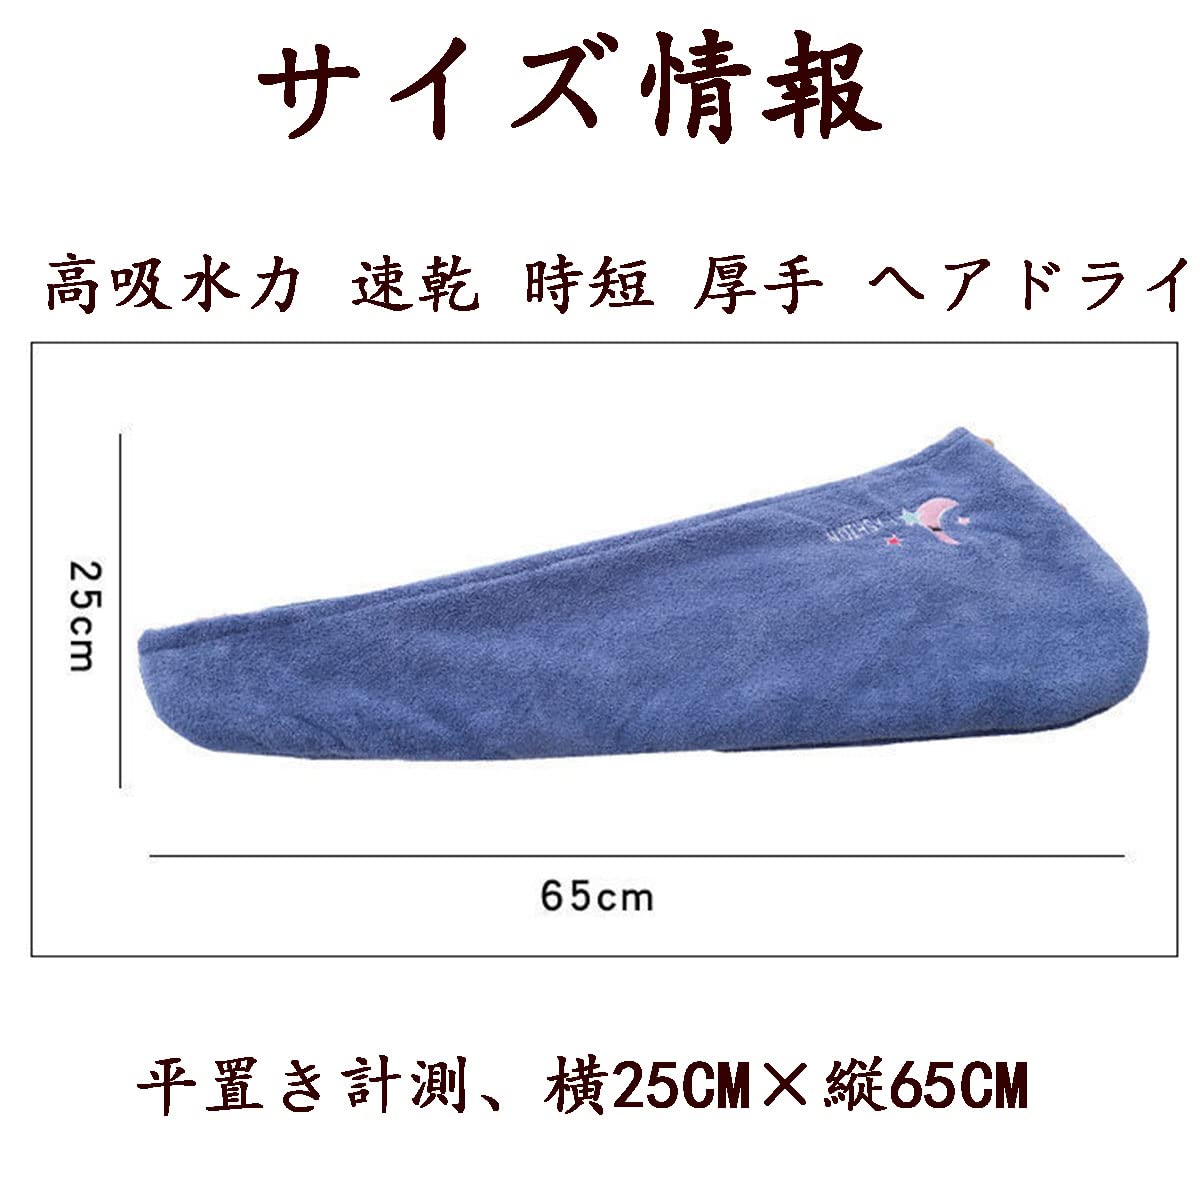 Haojee Hair Drying Towel For Hair Care Quick Drying Thick Pink Blue Japan - Absorbs Water Convenient After Bathing